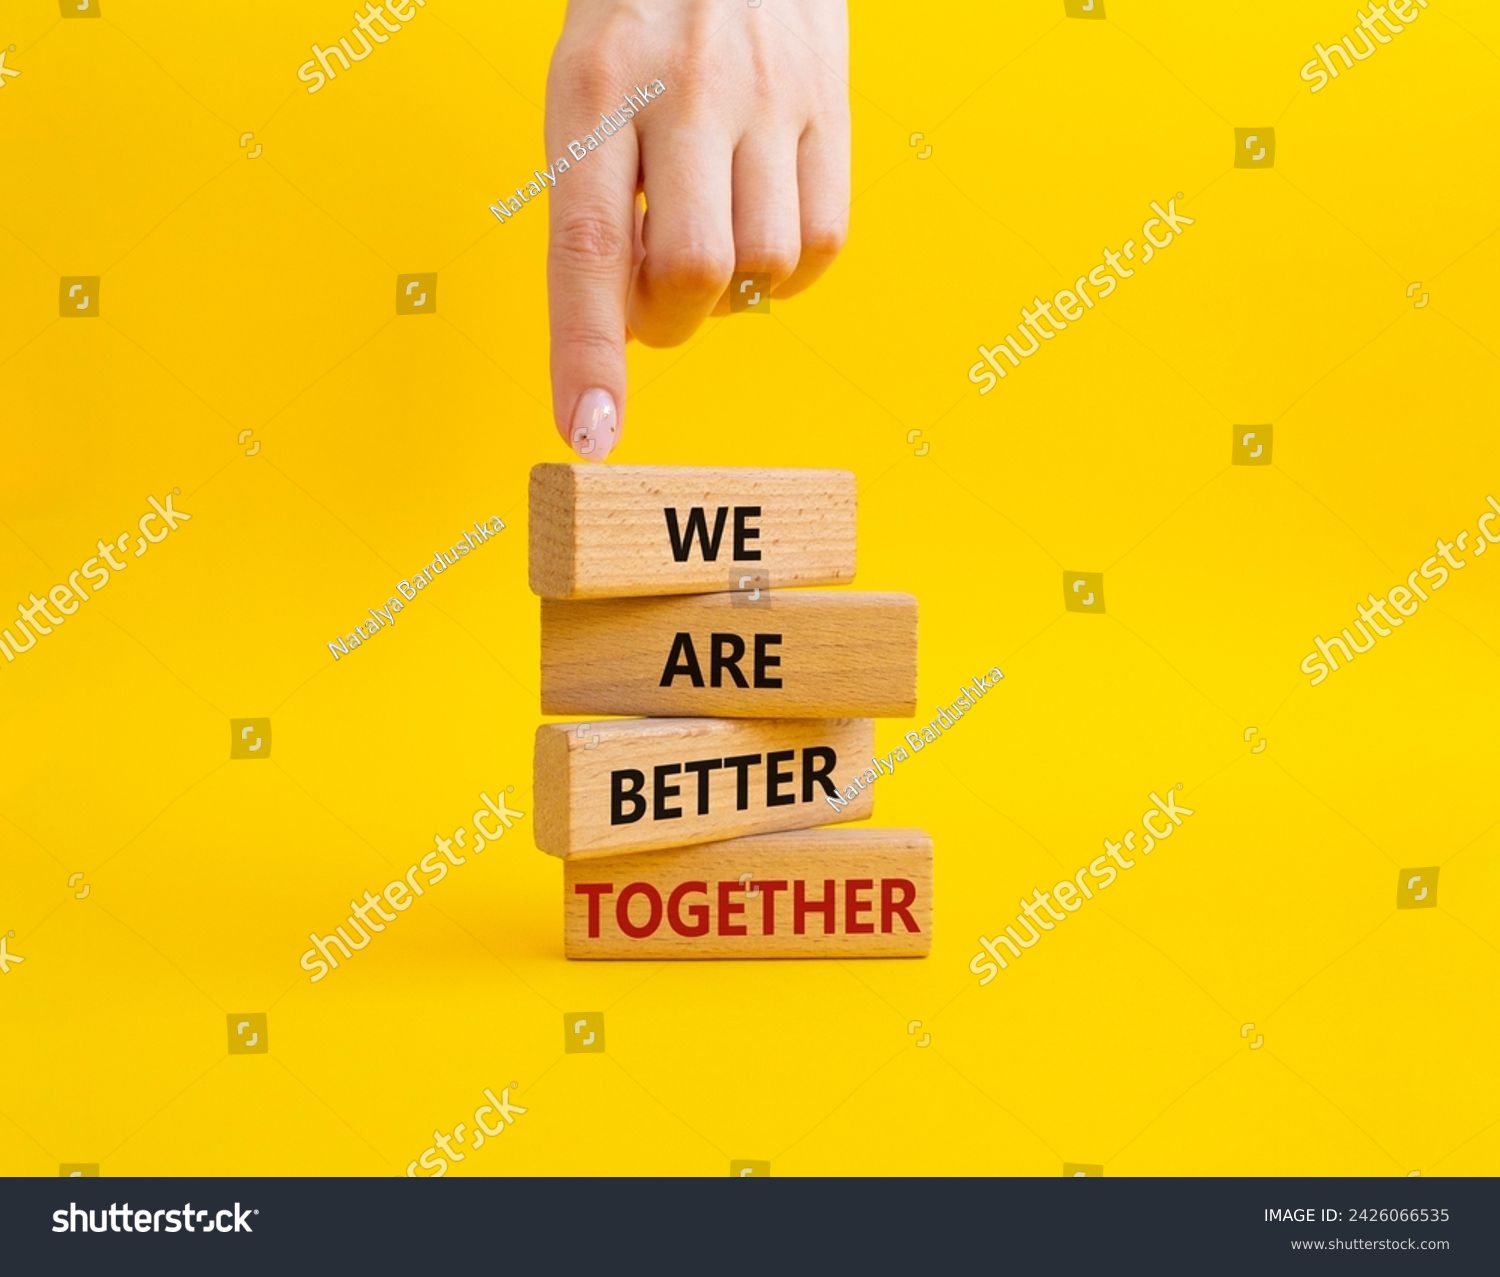 We are better together symbol. Wooden blocks with words We are better together. Beautiful yellow background. Businessman hand. We are better together concept. Copy space. #2426066535